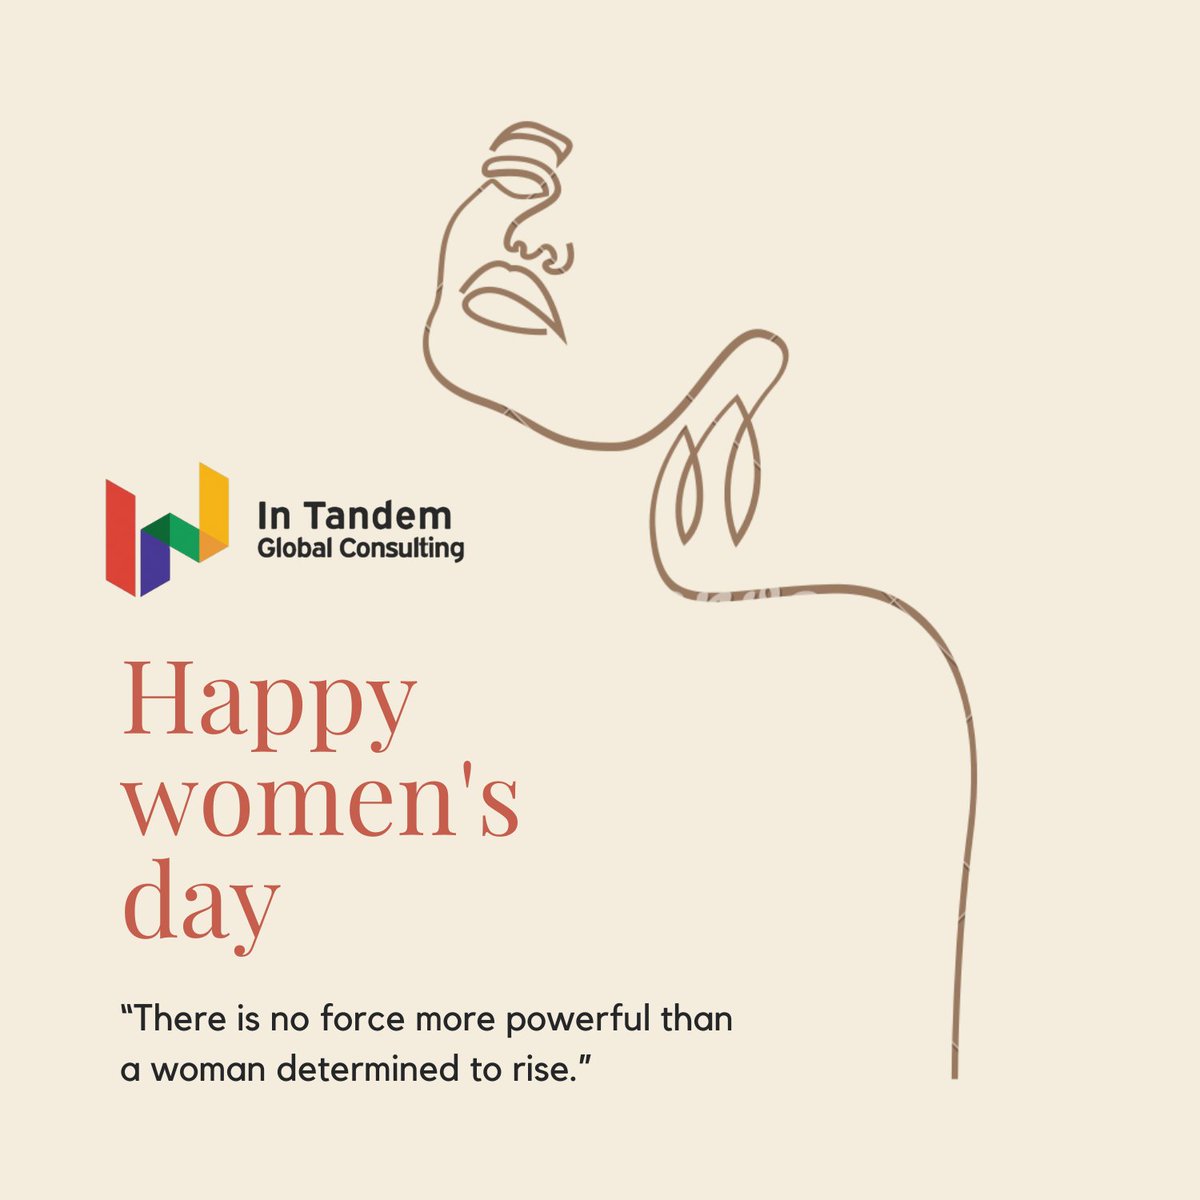 On this Women's Day, we celebrate each and every one of you who keep hustling, refusing to give up or give in. As we reflect on the achievements of women worldwide, let's continue to support & uplift each other. Happy Women's Day! @shormishtha12 @jecpurvanchal